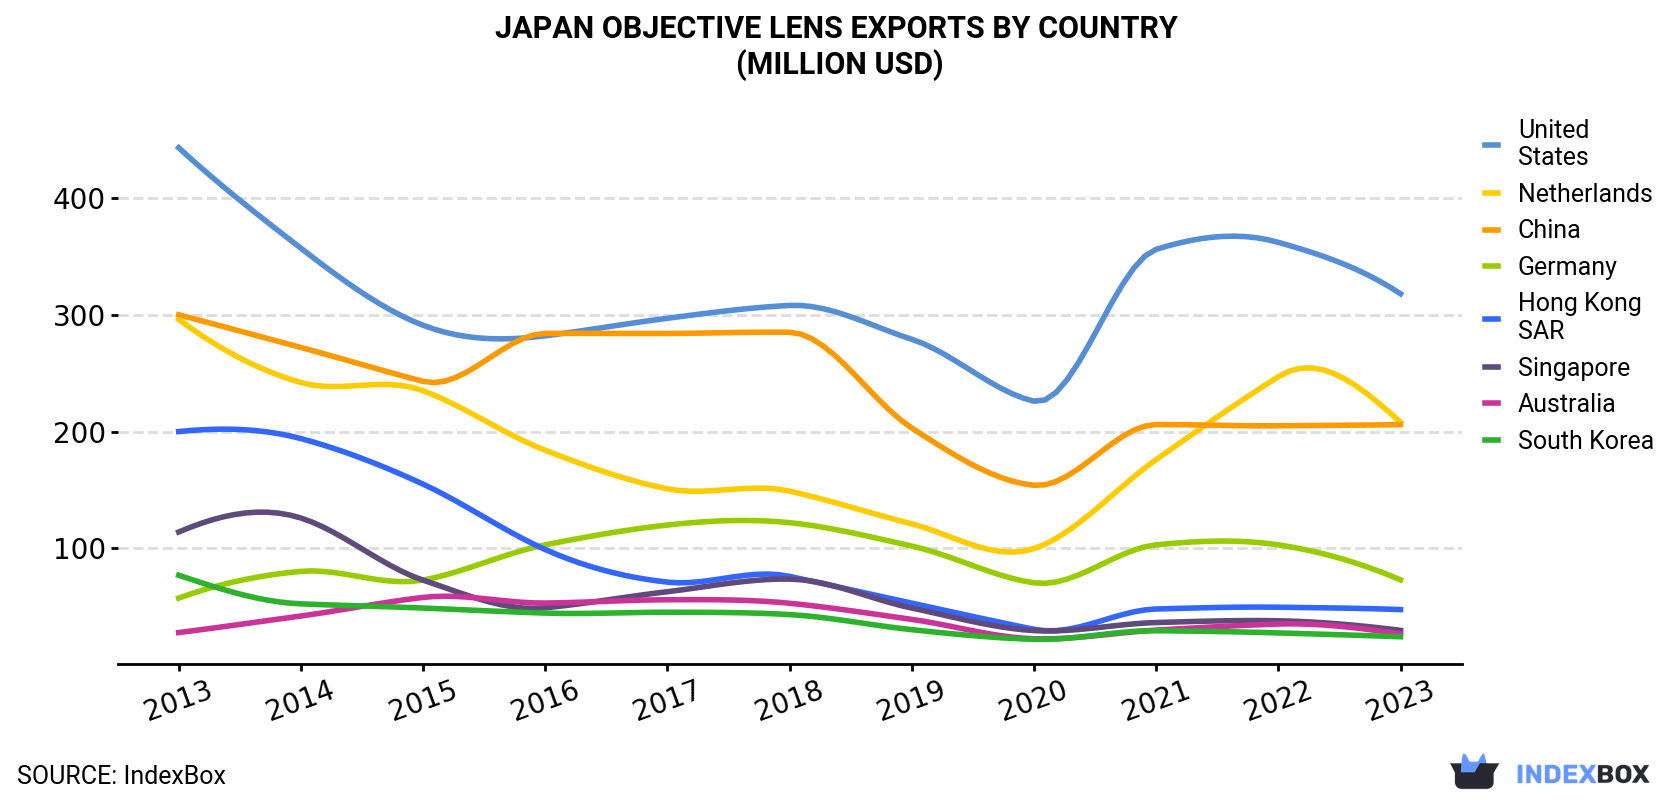 Japan Objective Lens Exports By Country (Million USD)